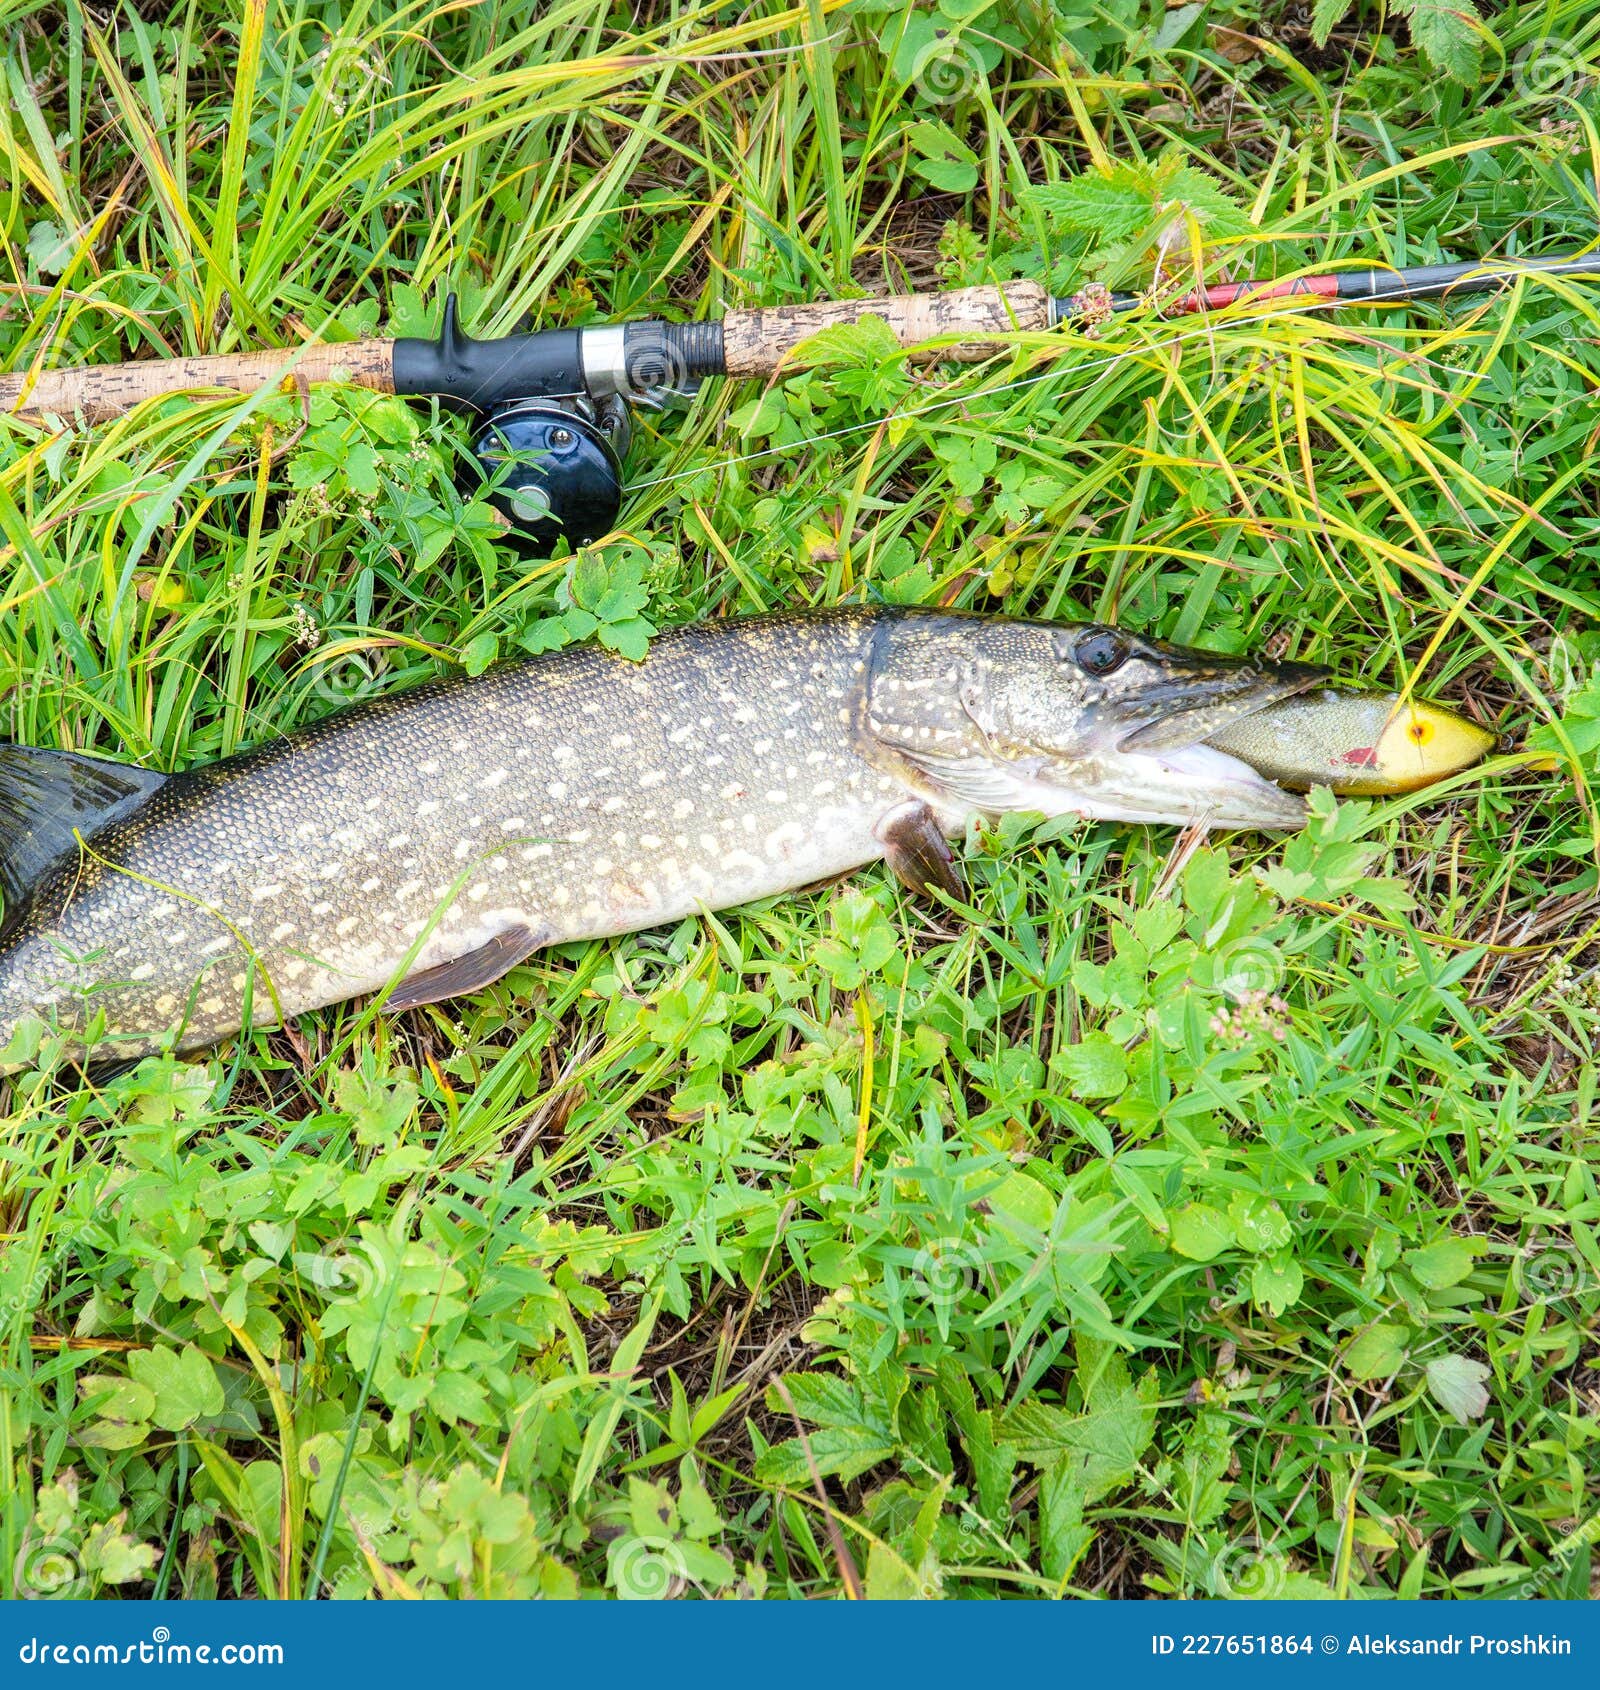 Pike and Spinning with Baitcasting Reel on Grass Stock Photo